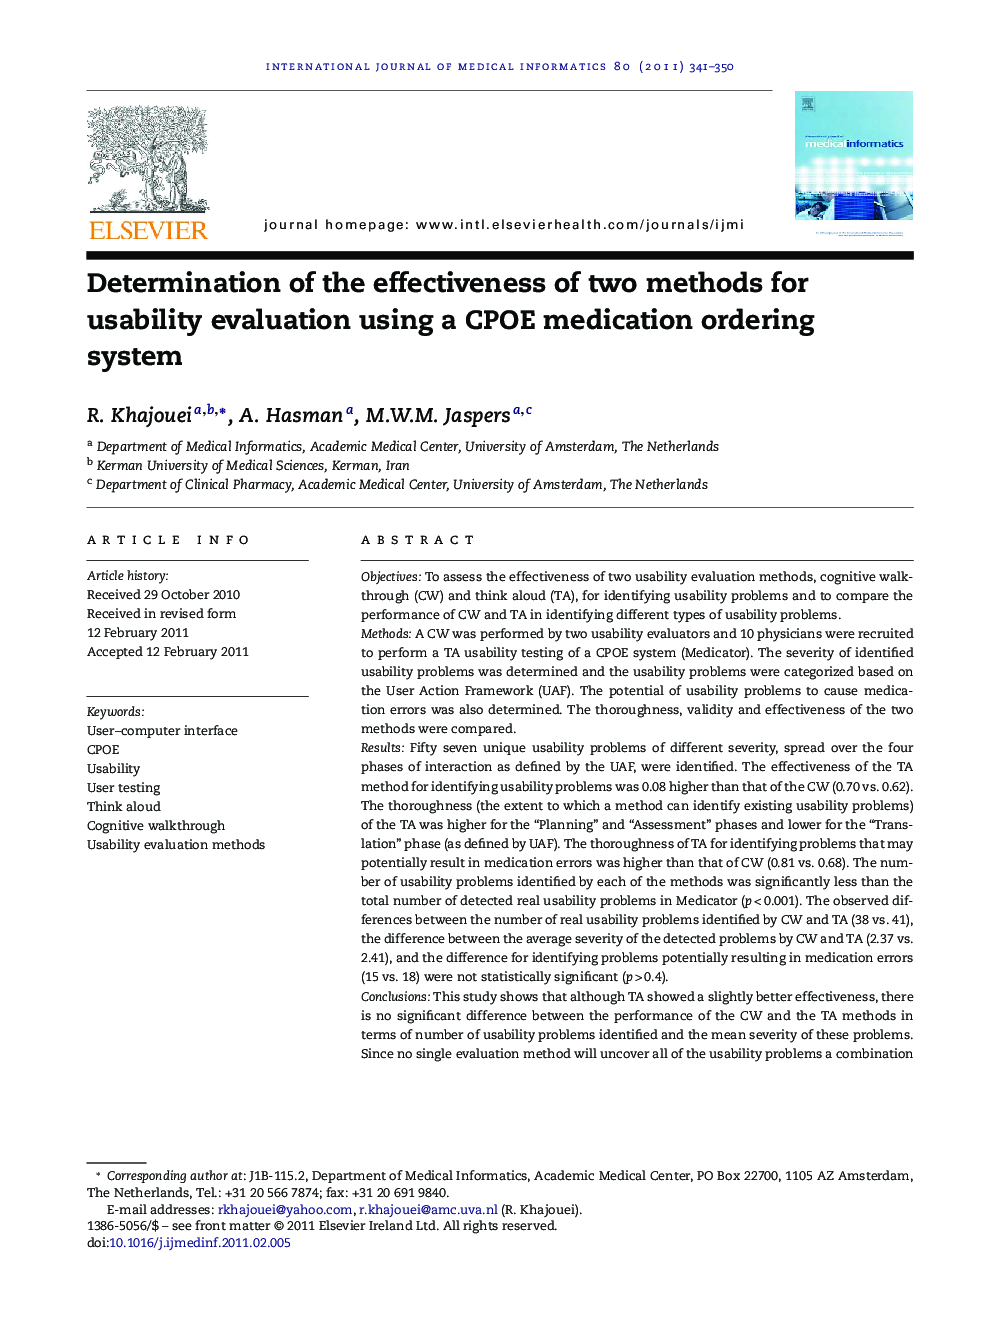 Determination of the effectiveness of two methods for usability evaluation using a CPOE medication ordering system